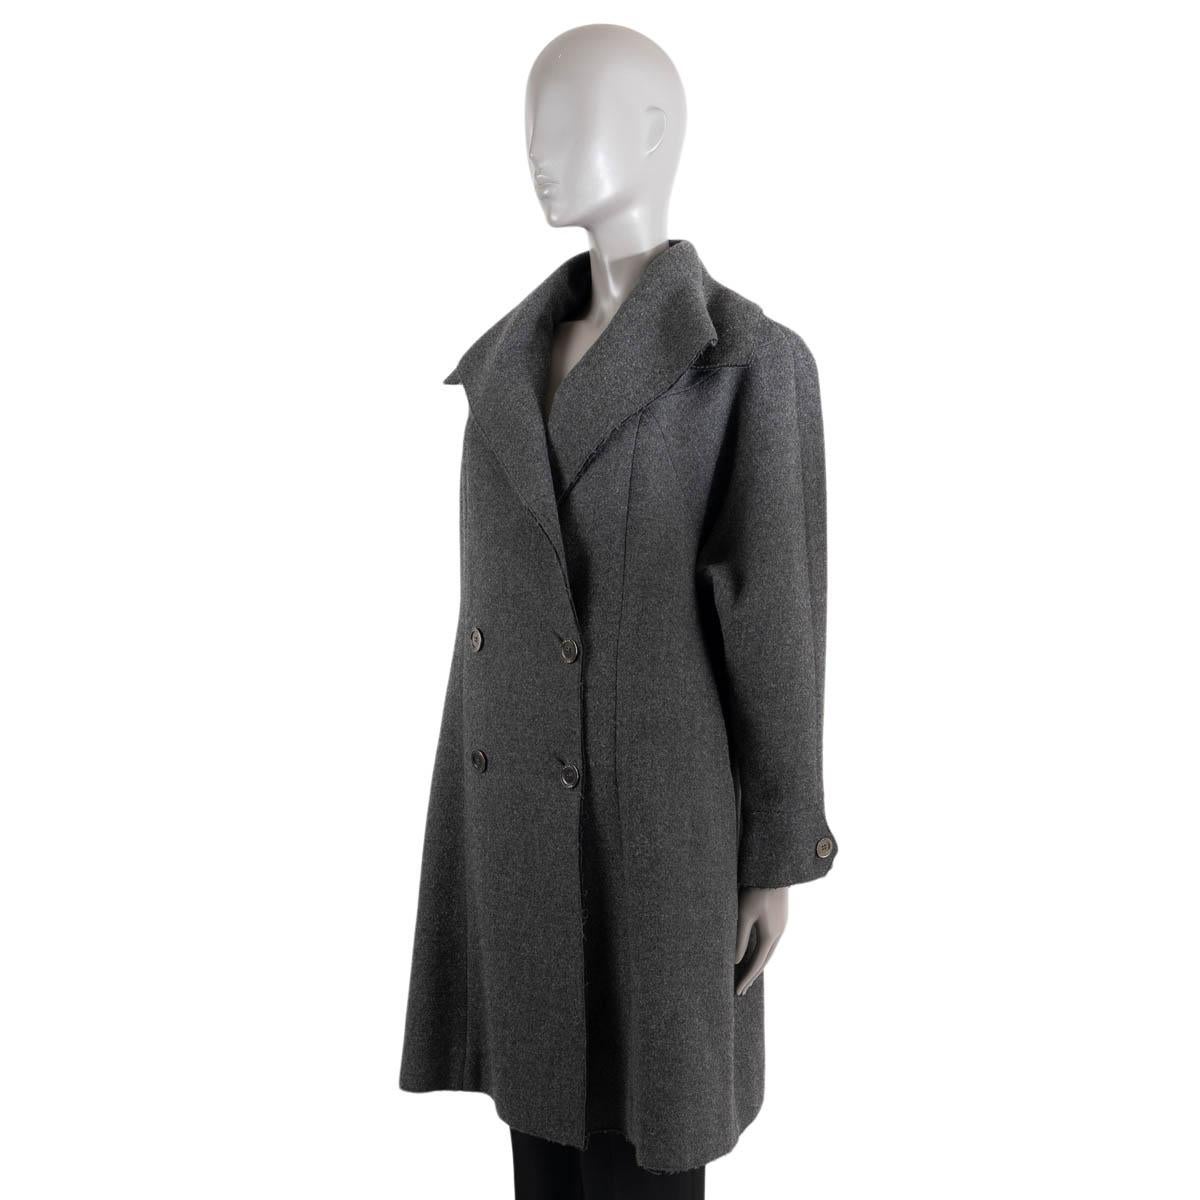 CHANEL anthracite grey wool 2011 11A BYZANCE DOUBLE BREASTED Coat Jacket 46 XL For Sale 1